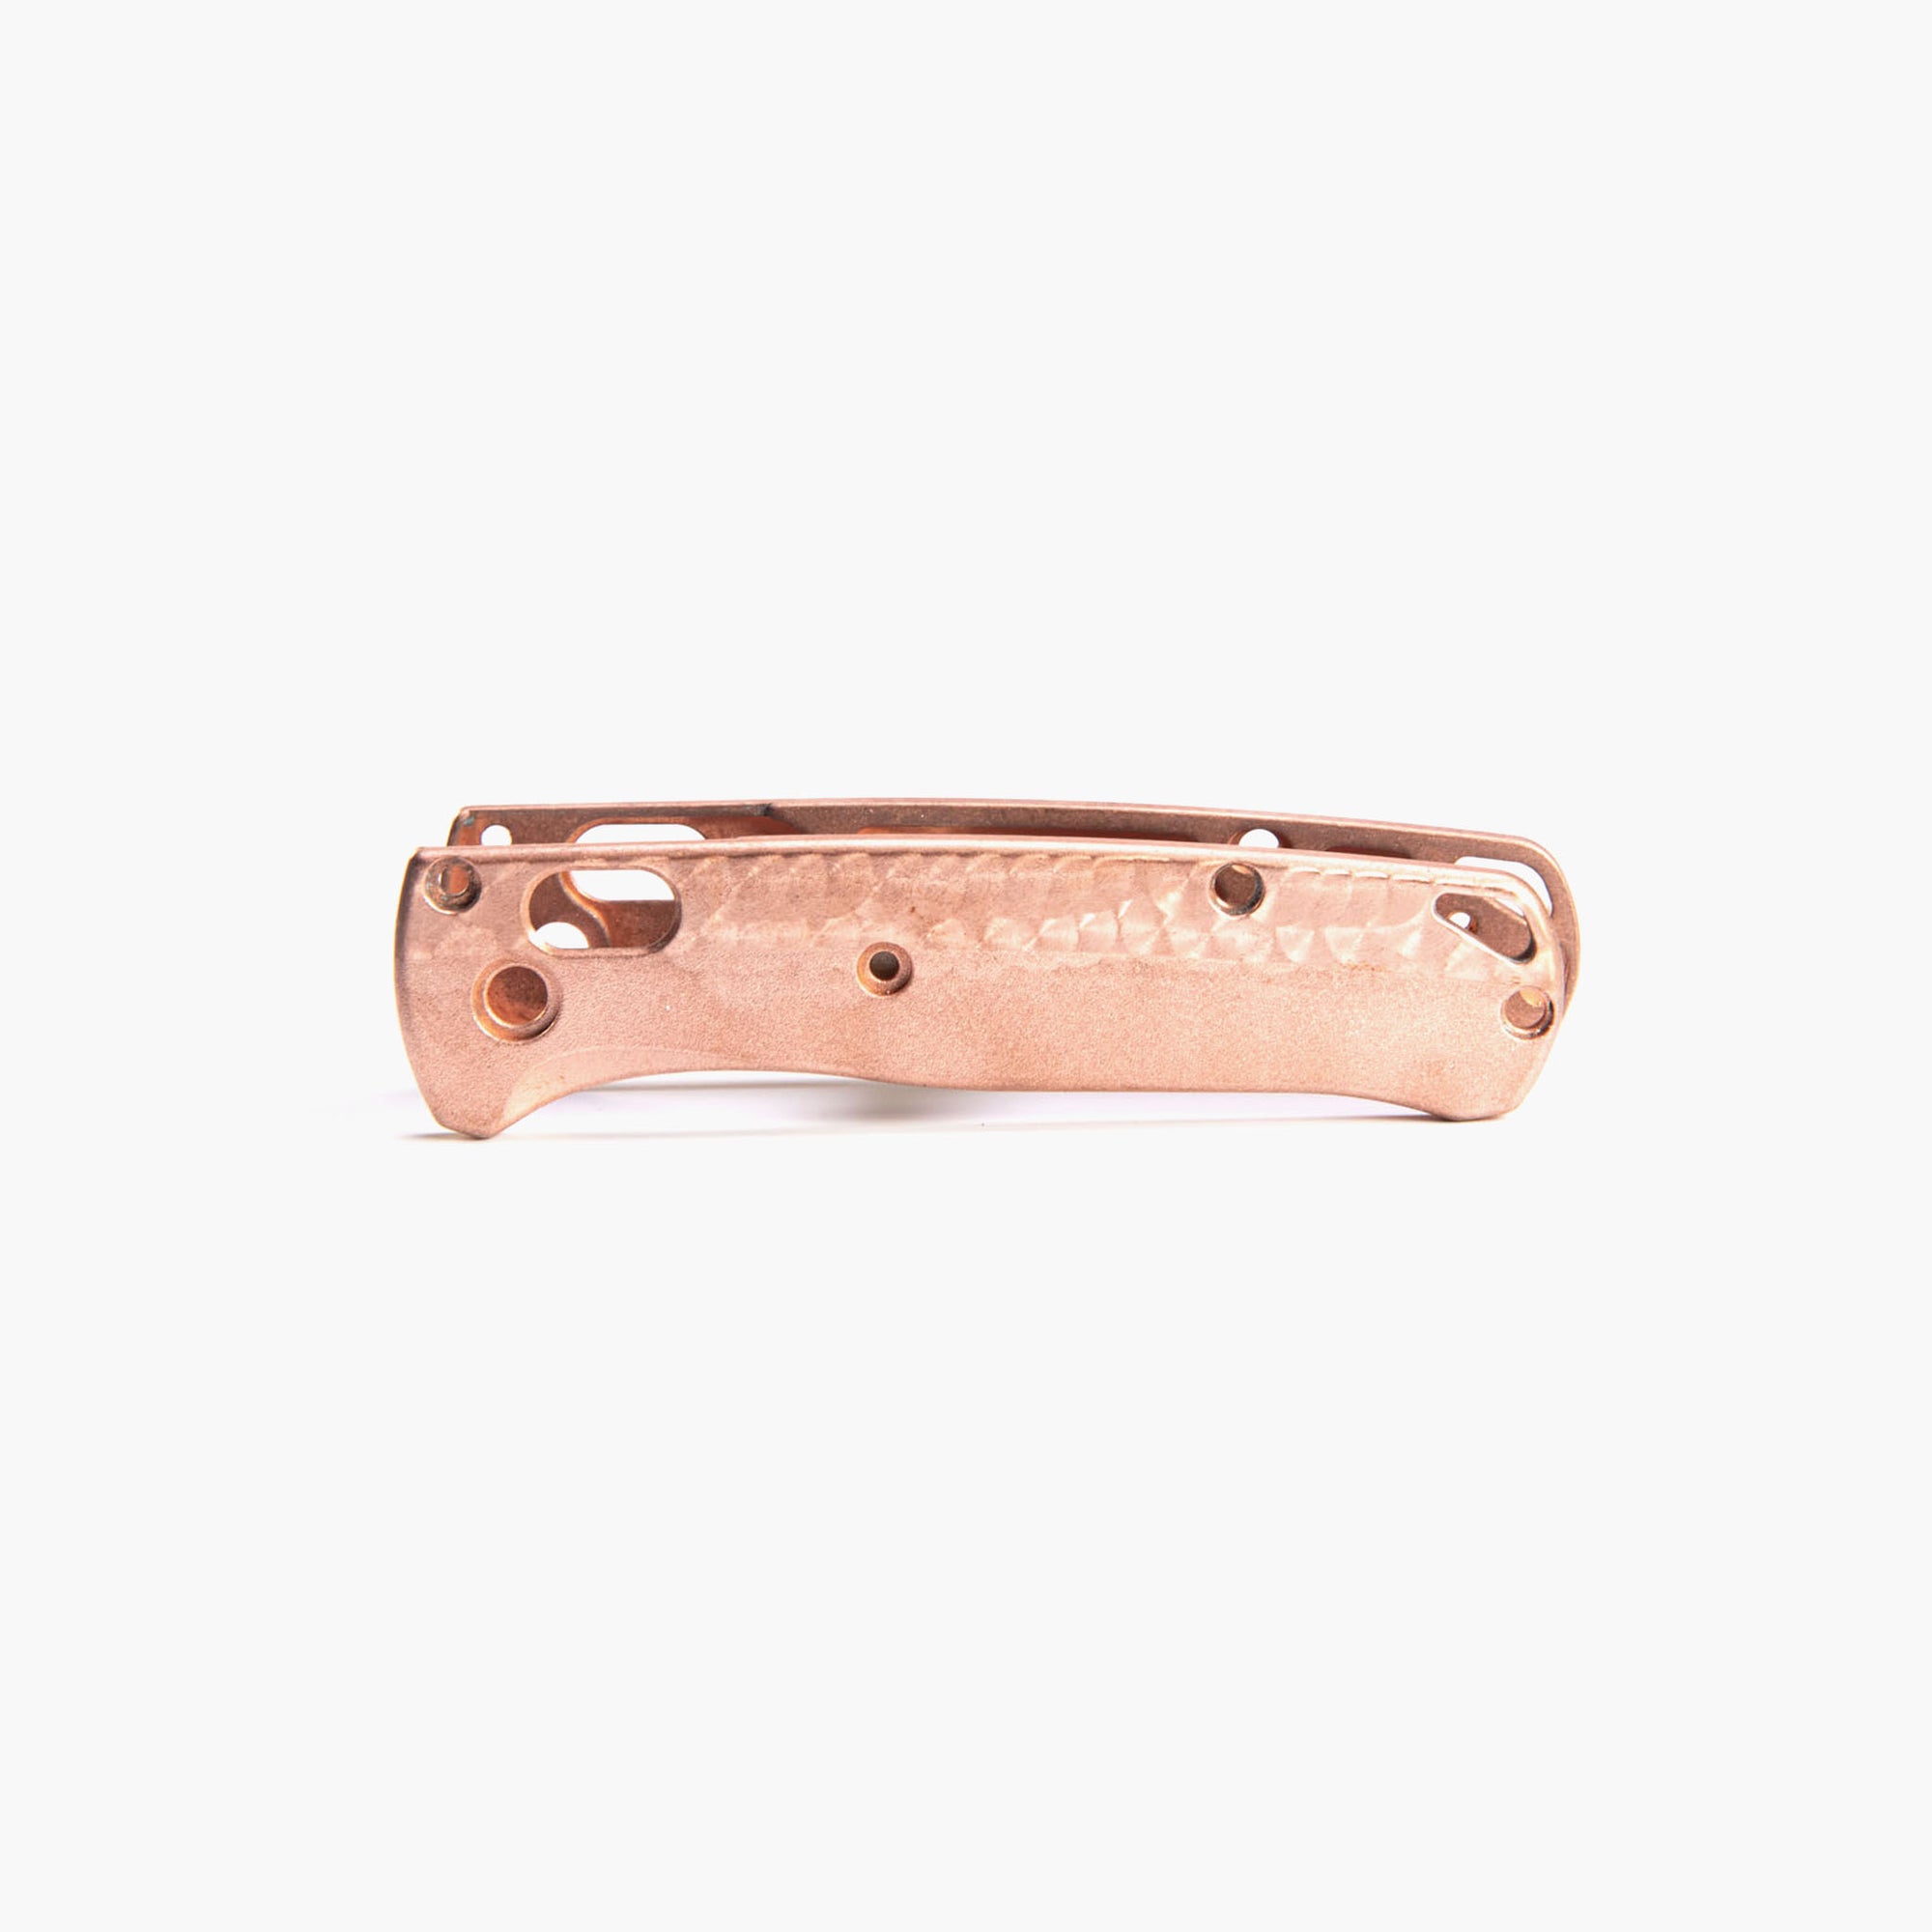 LTD Jeweled Copper Scales for Benchmade MINI Bugout Knife